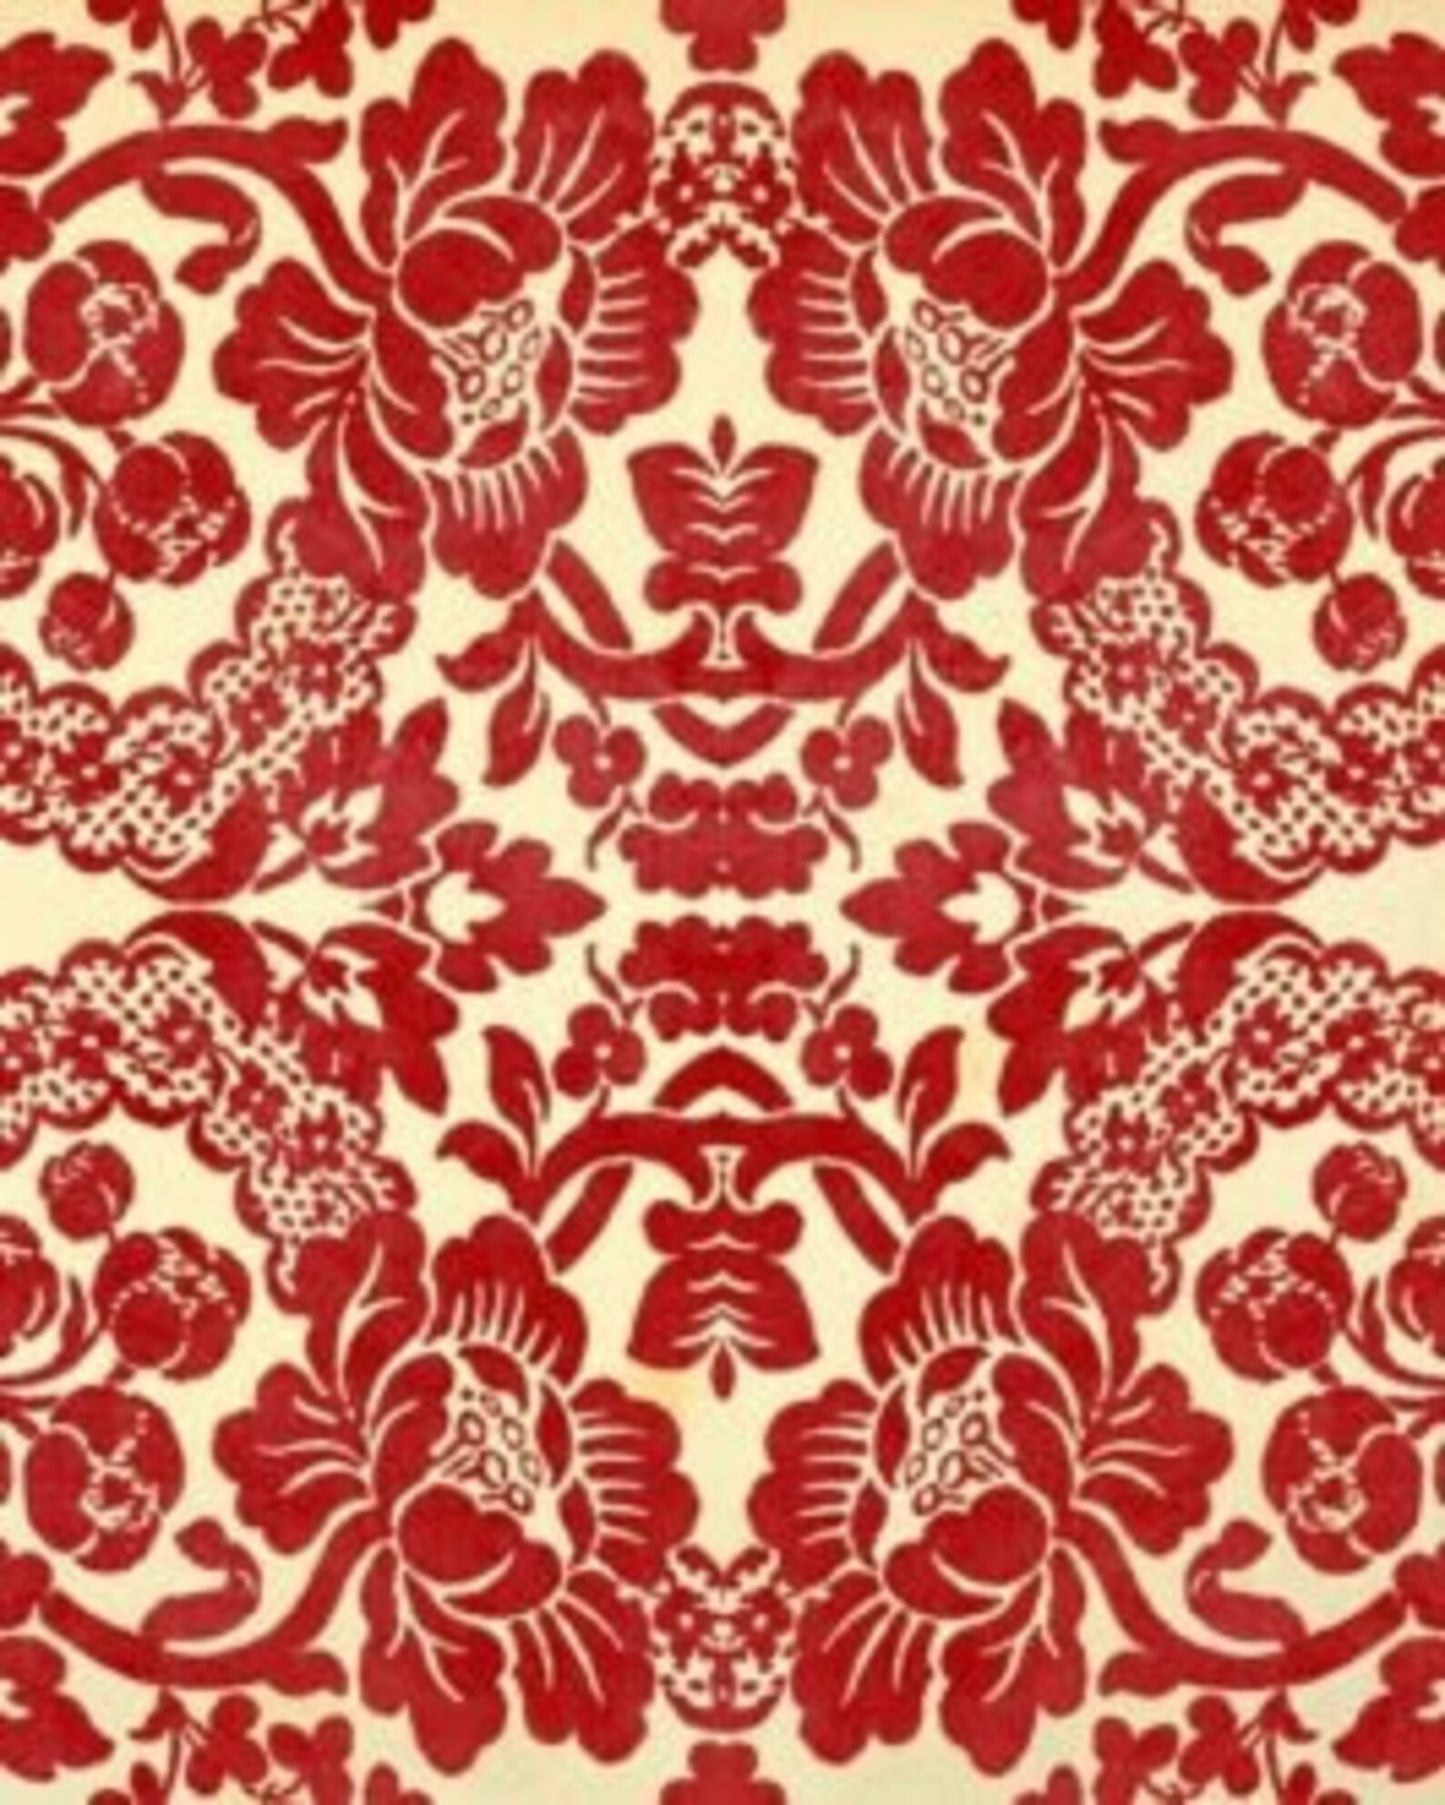 RED DAMASK Decoupage Paper by Roycycled 20 x 30 inches